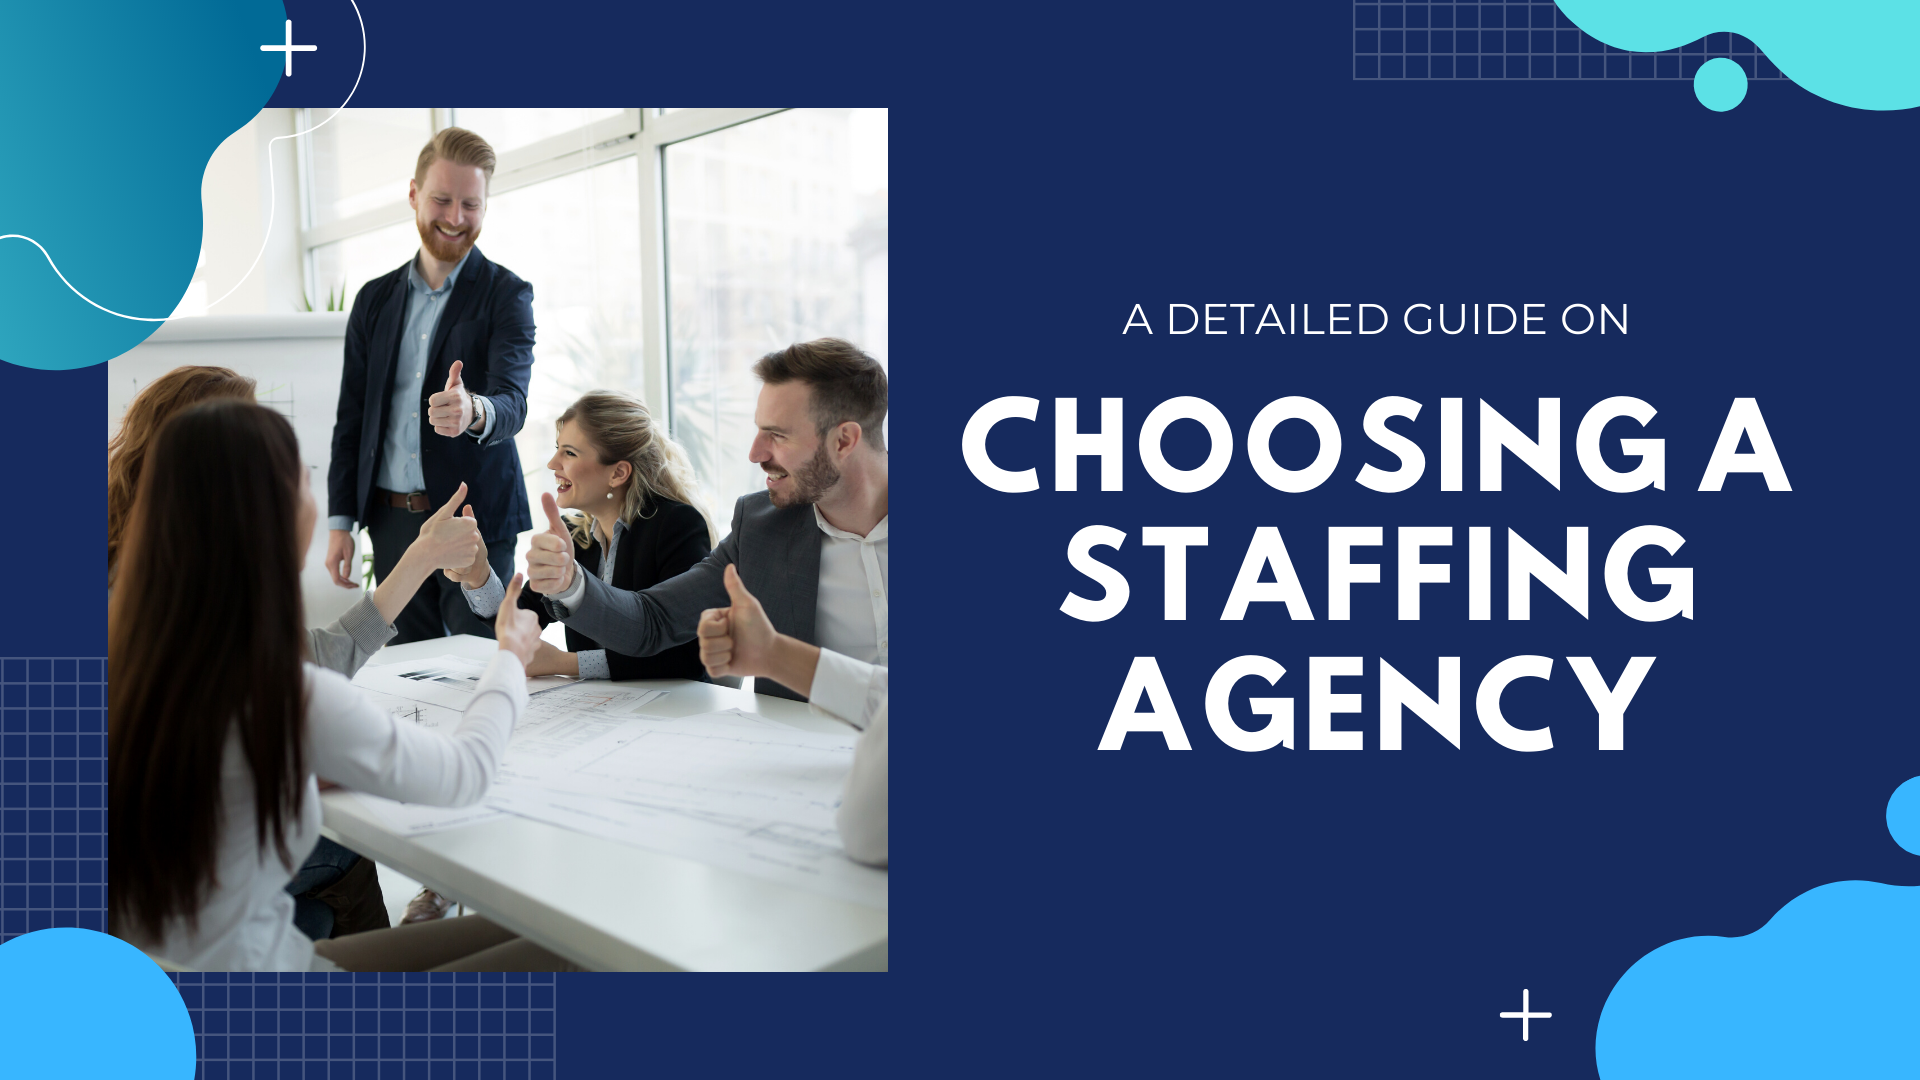 How to Choose the Best Staff Agency?